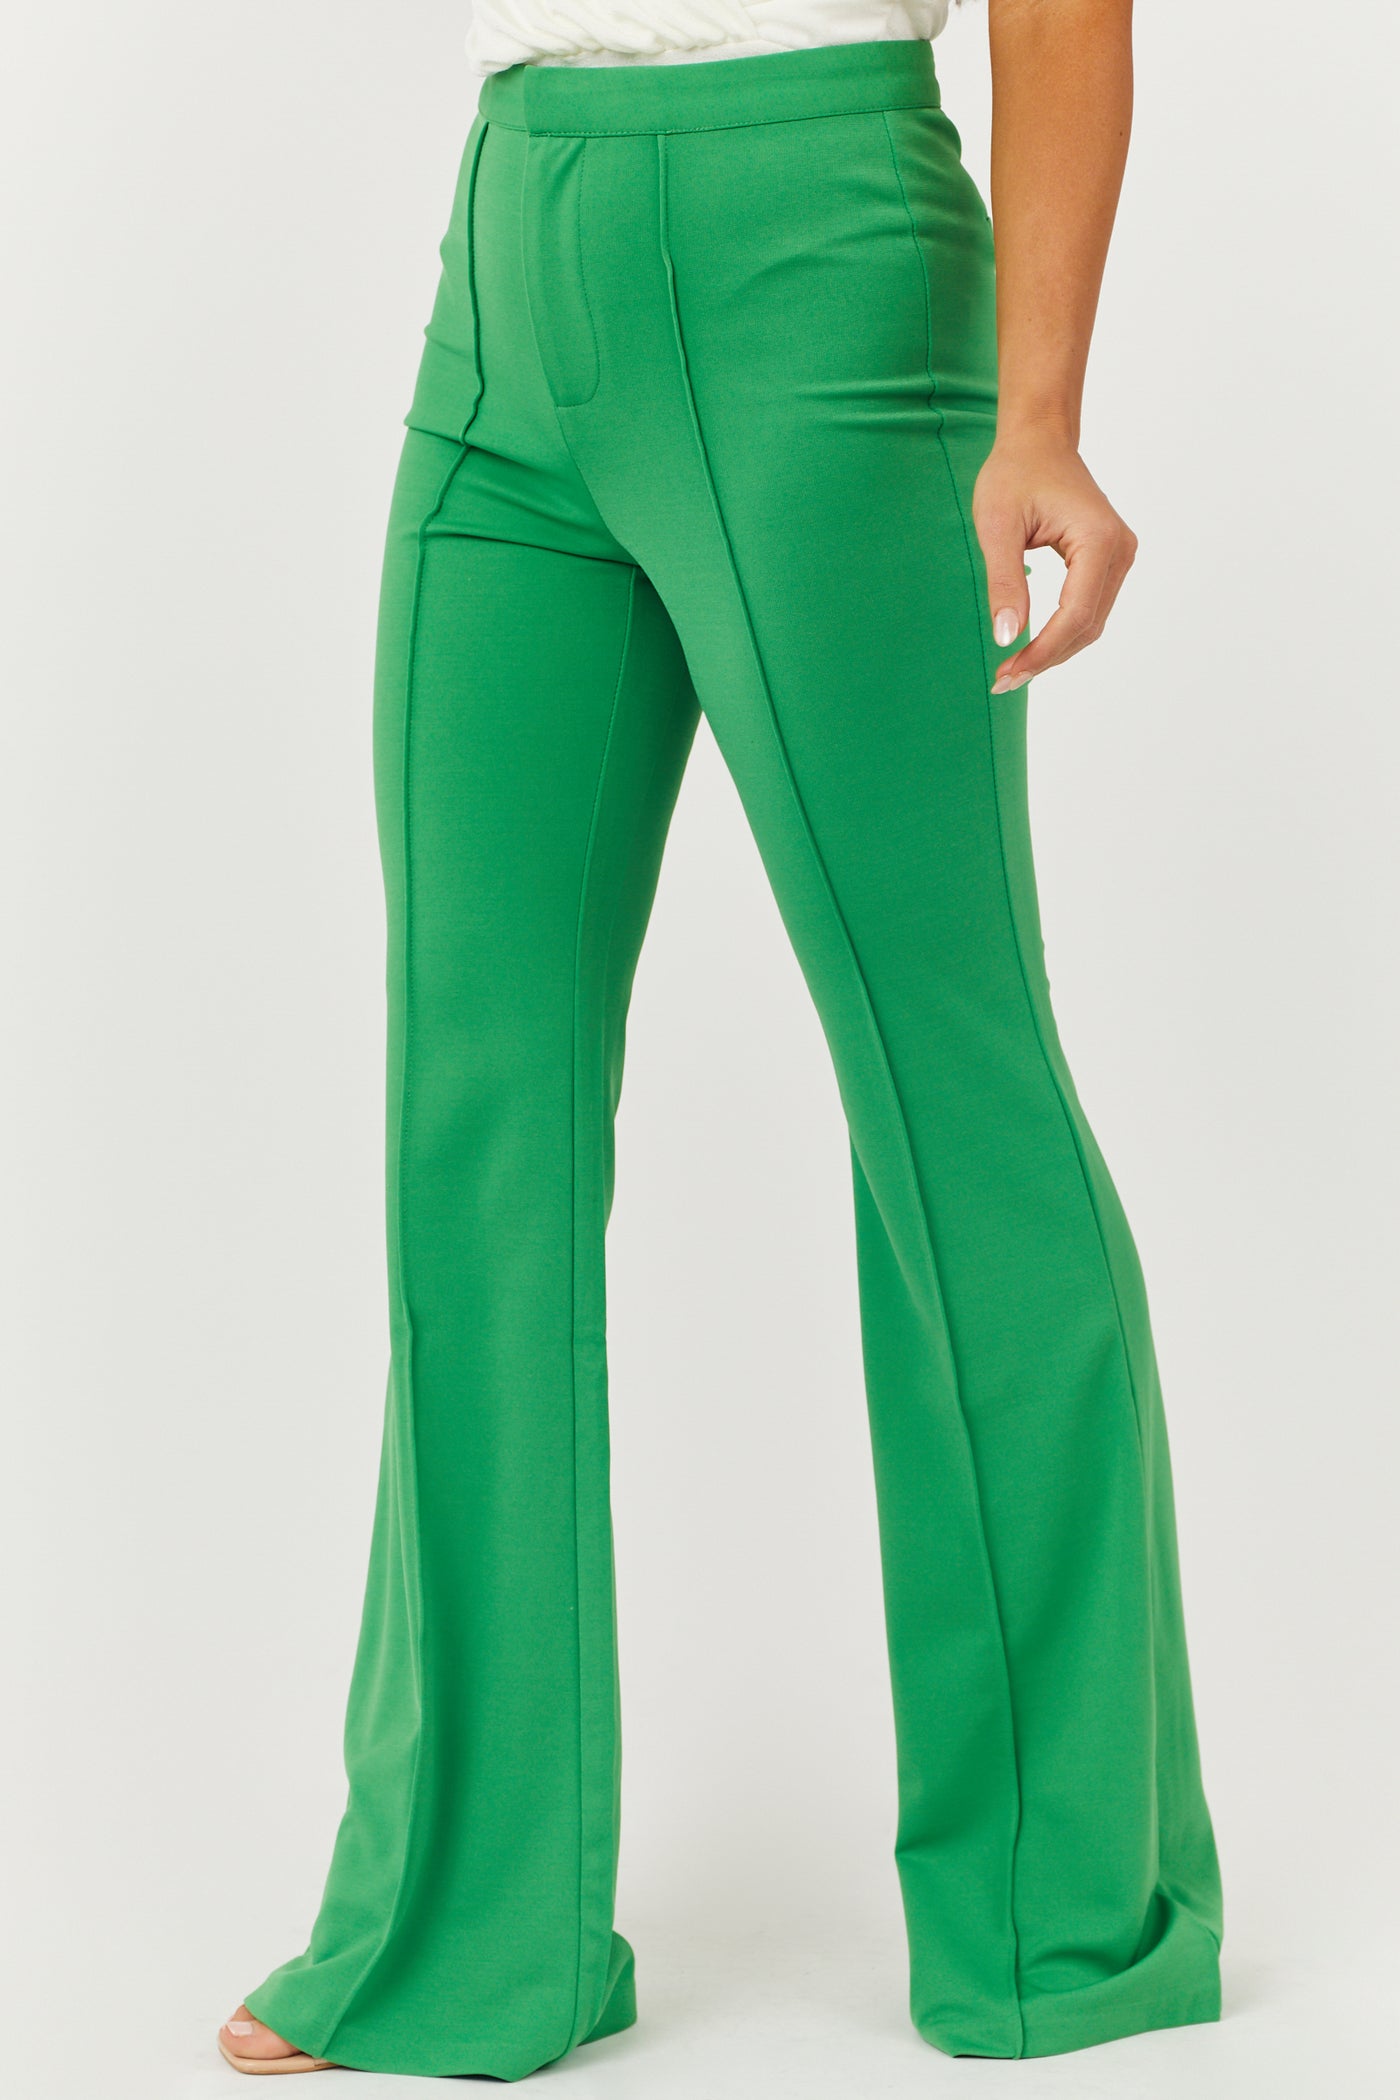 Flying Tomato Green High Rise Flare Pants with Seam Detail | Lime Lush